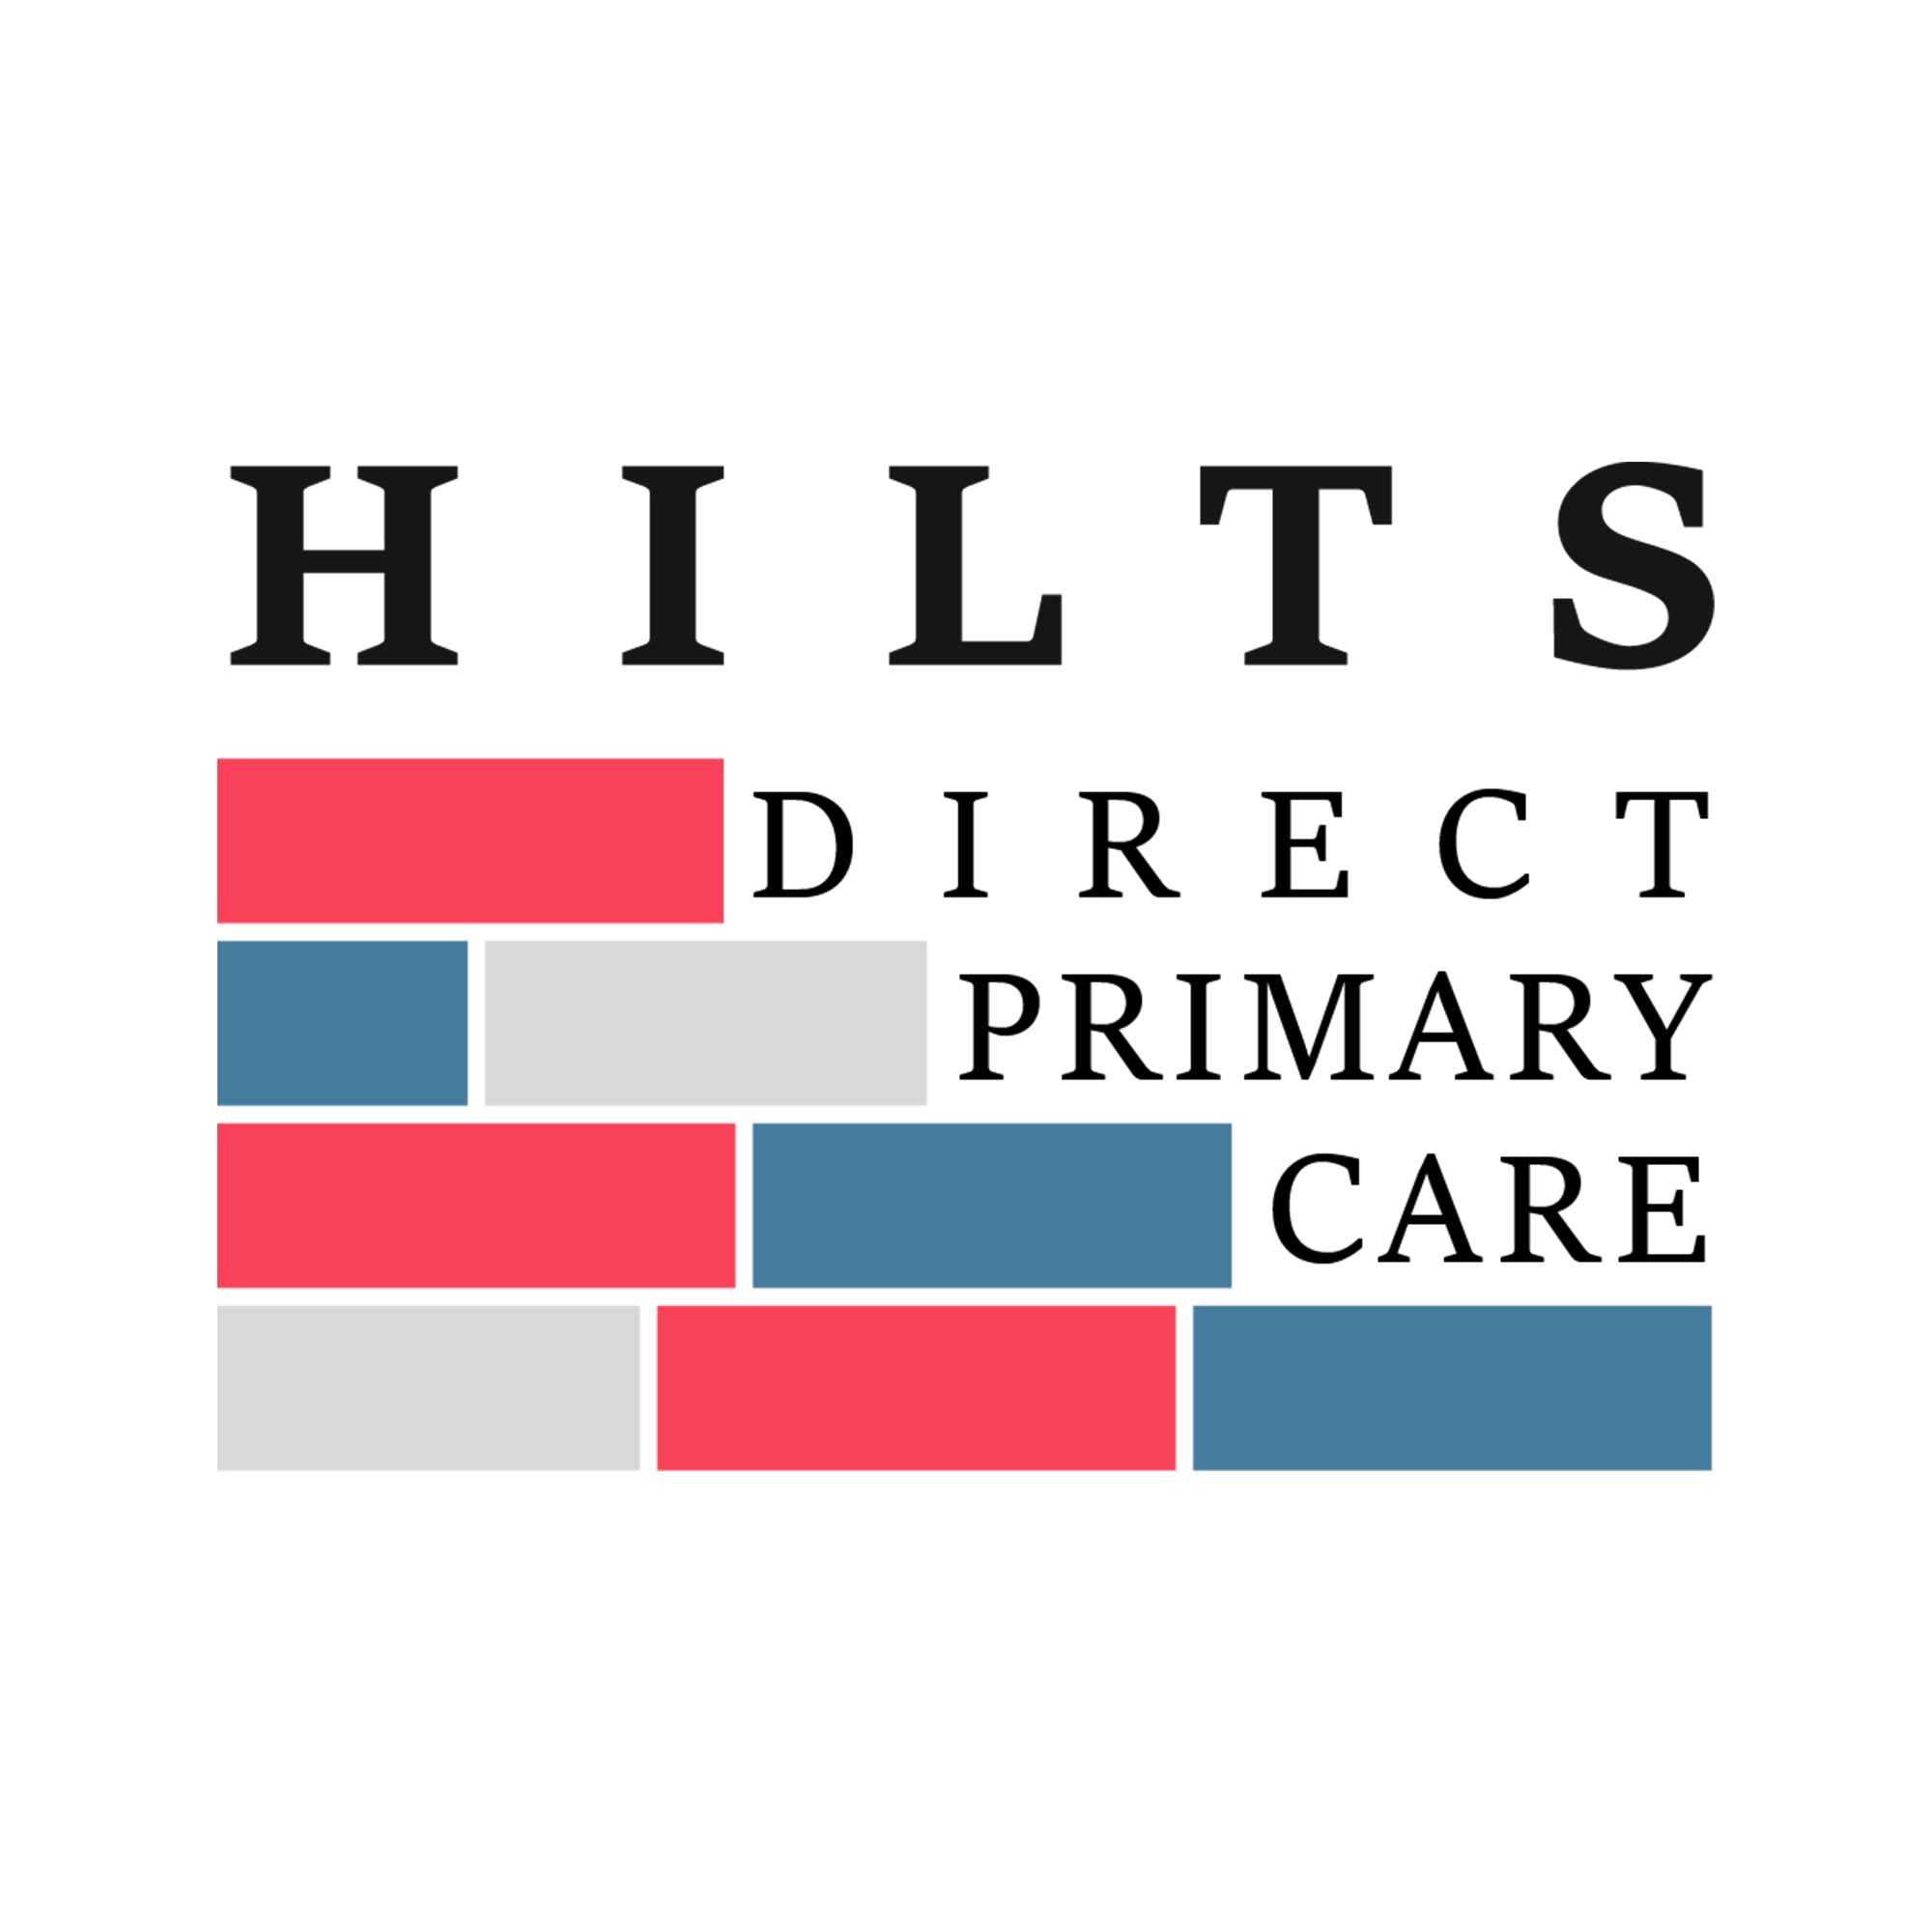 Hilts Direct Primary Care